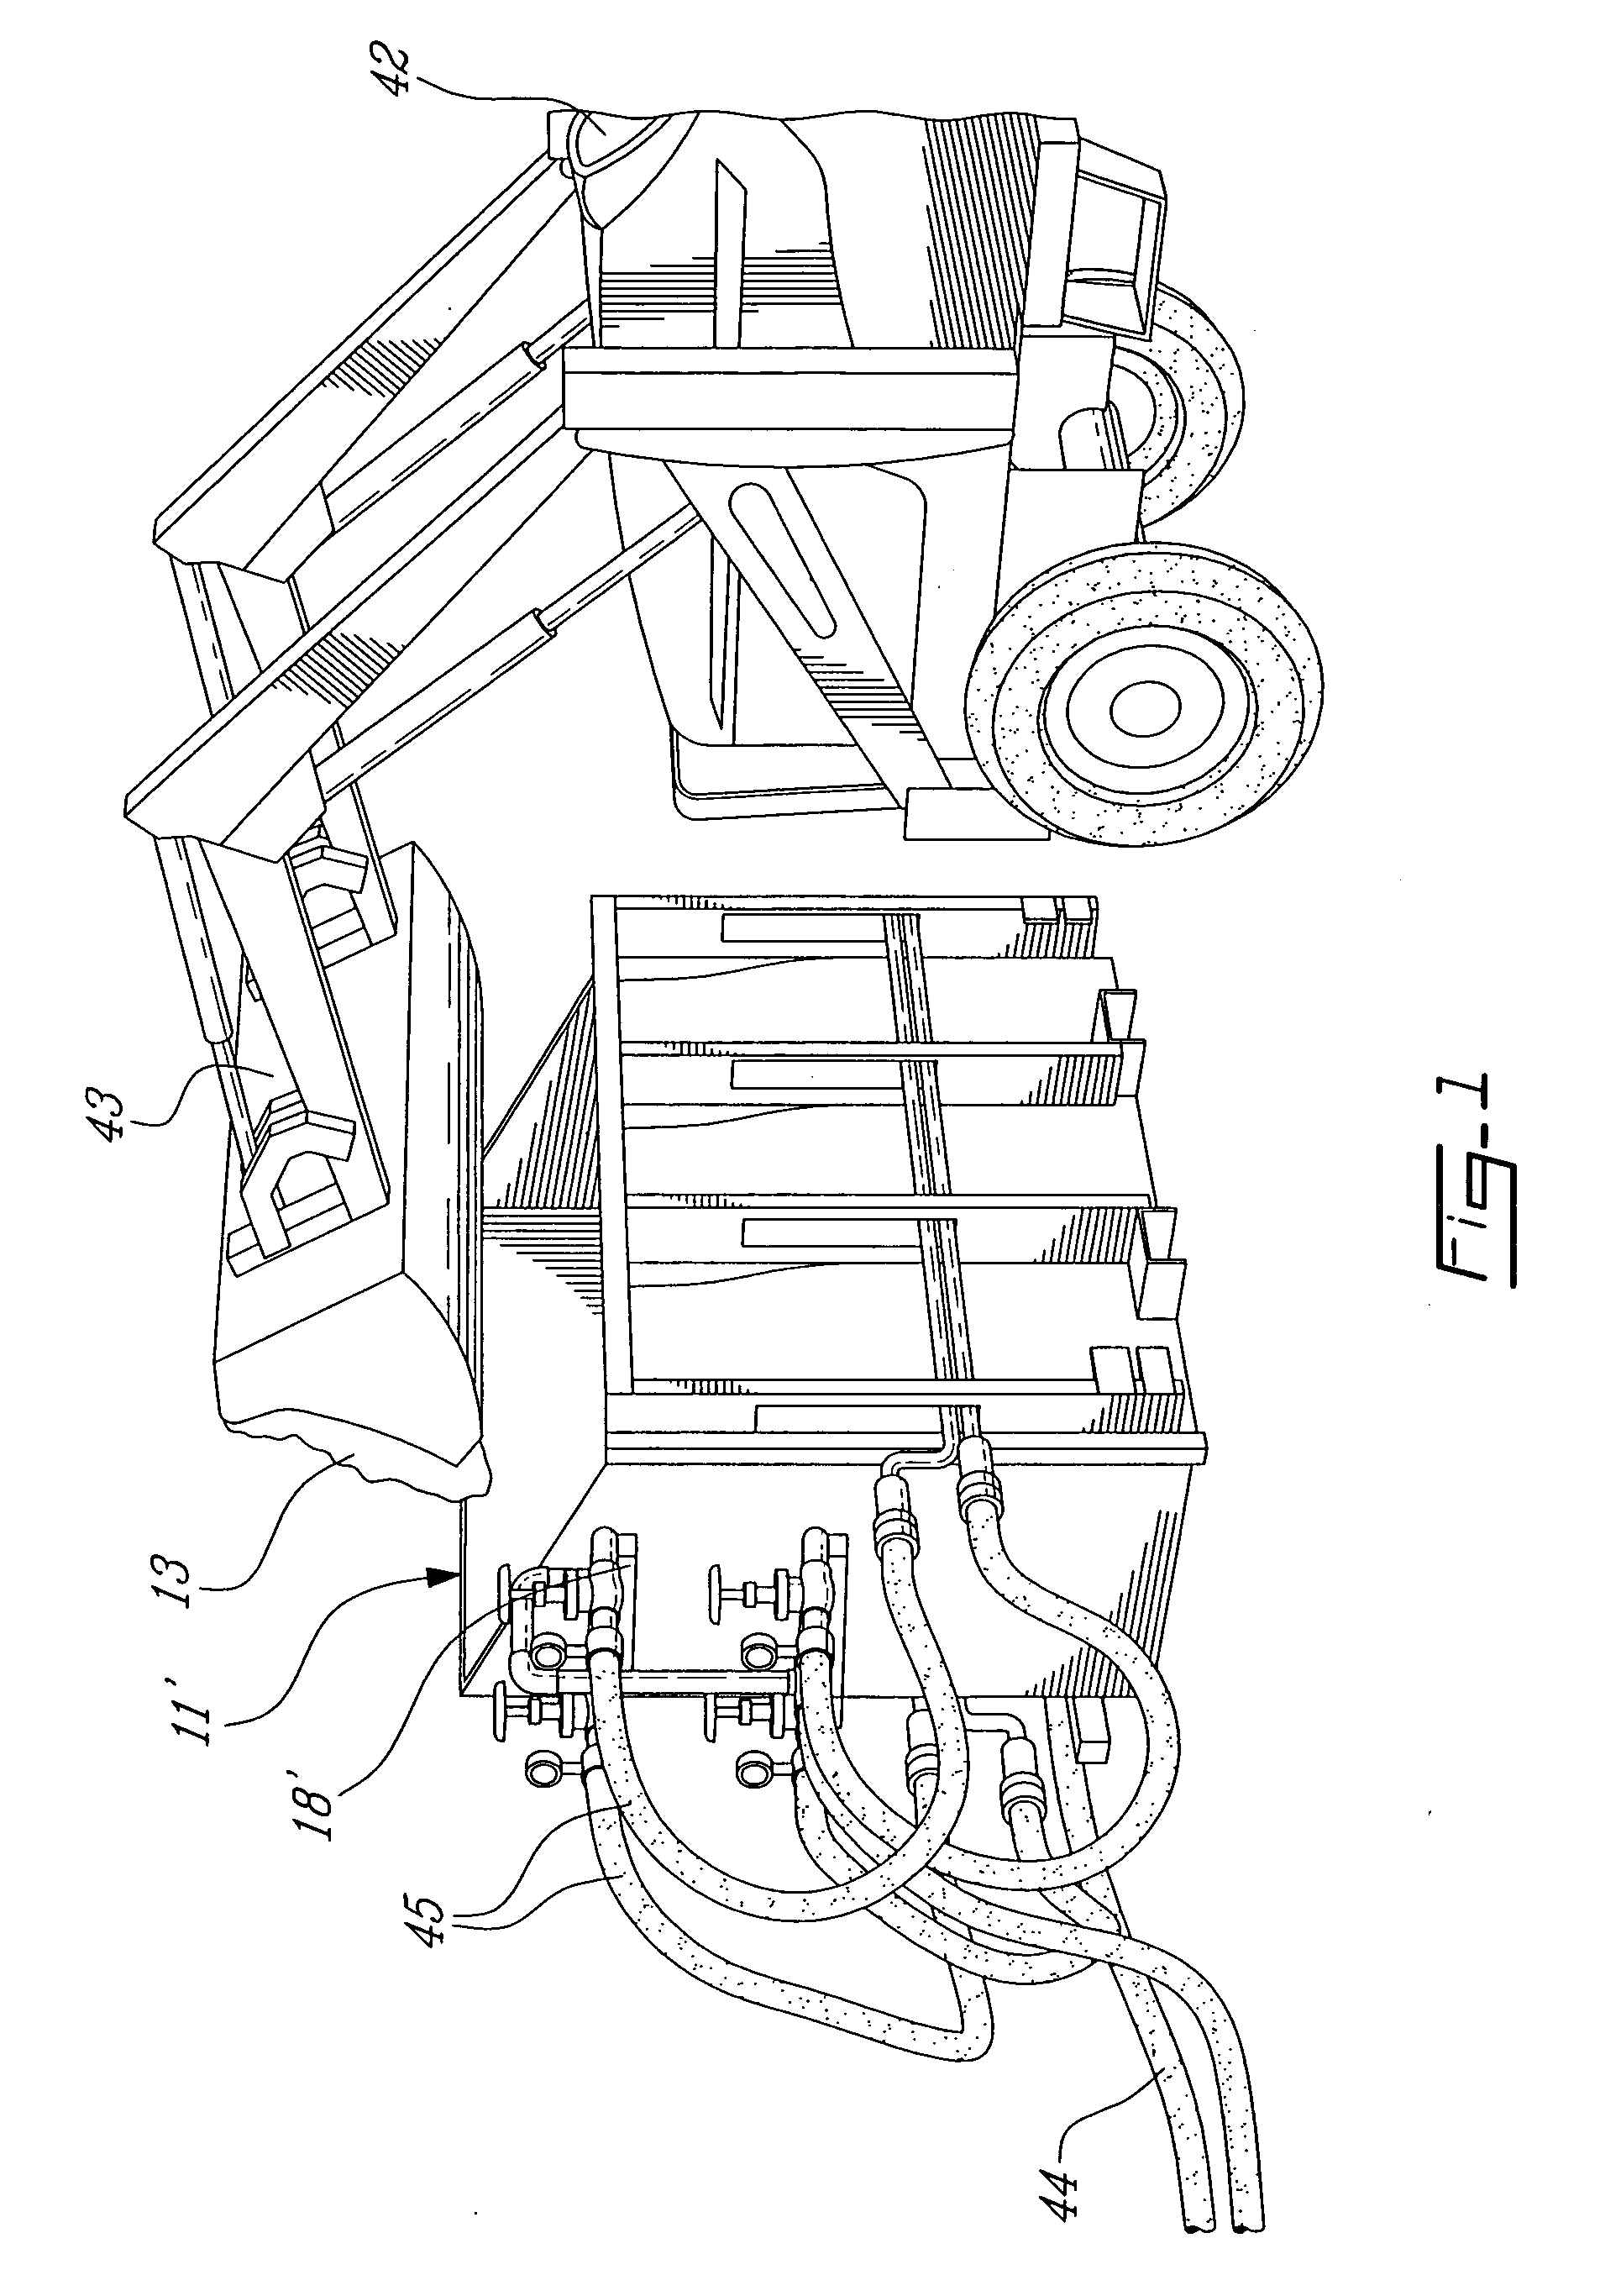 Snow melting system and method with direct-contact water heater